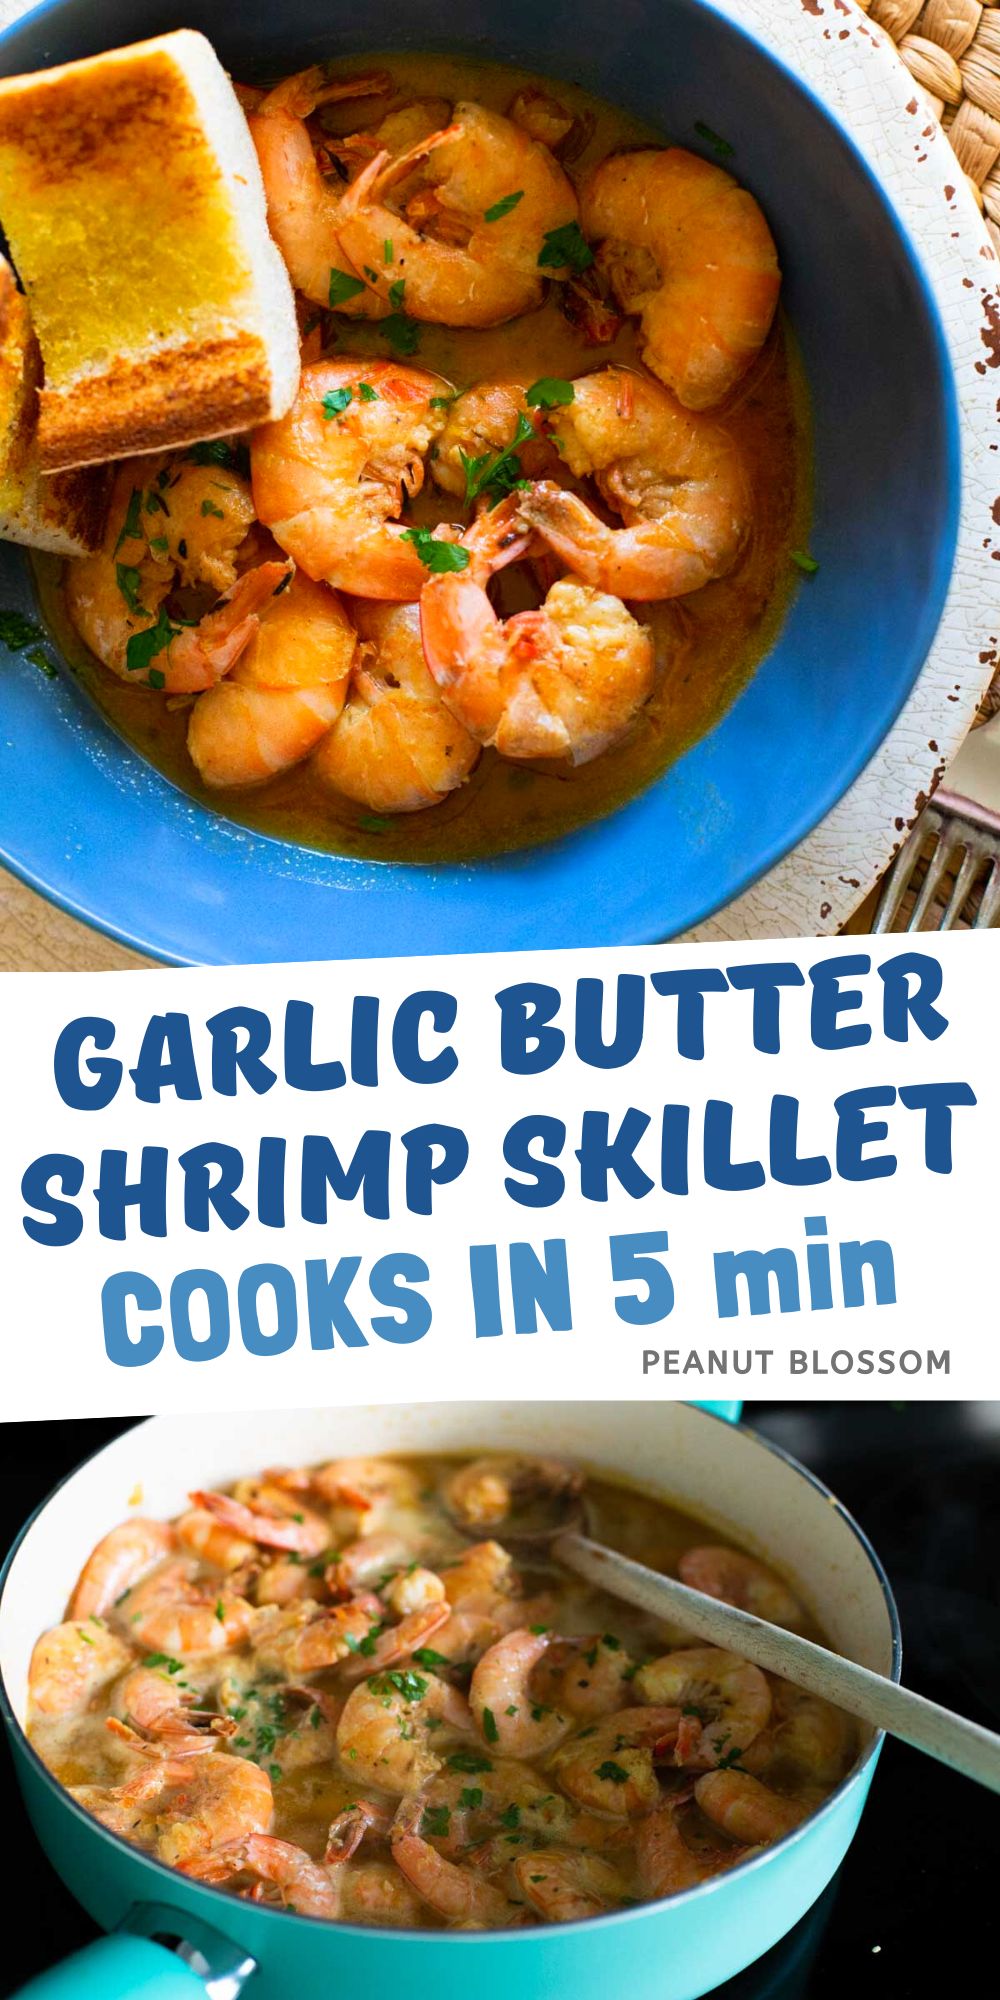 The garlic butter shrimp are served in a blue bowl with crusty bread. The second photo shows the shrimp in the skillet being cooked.